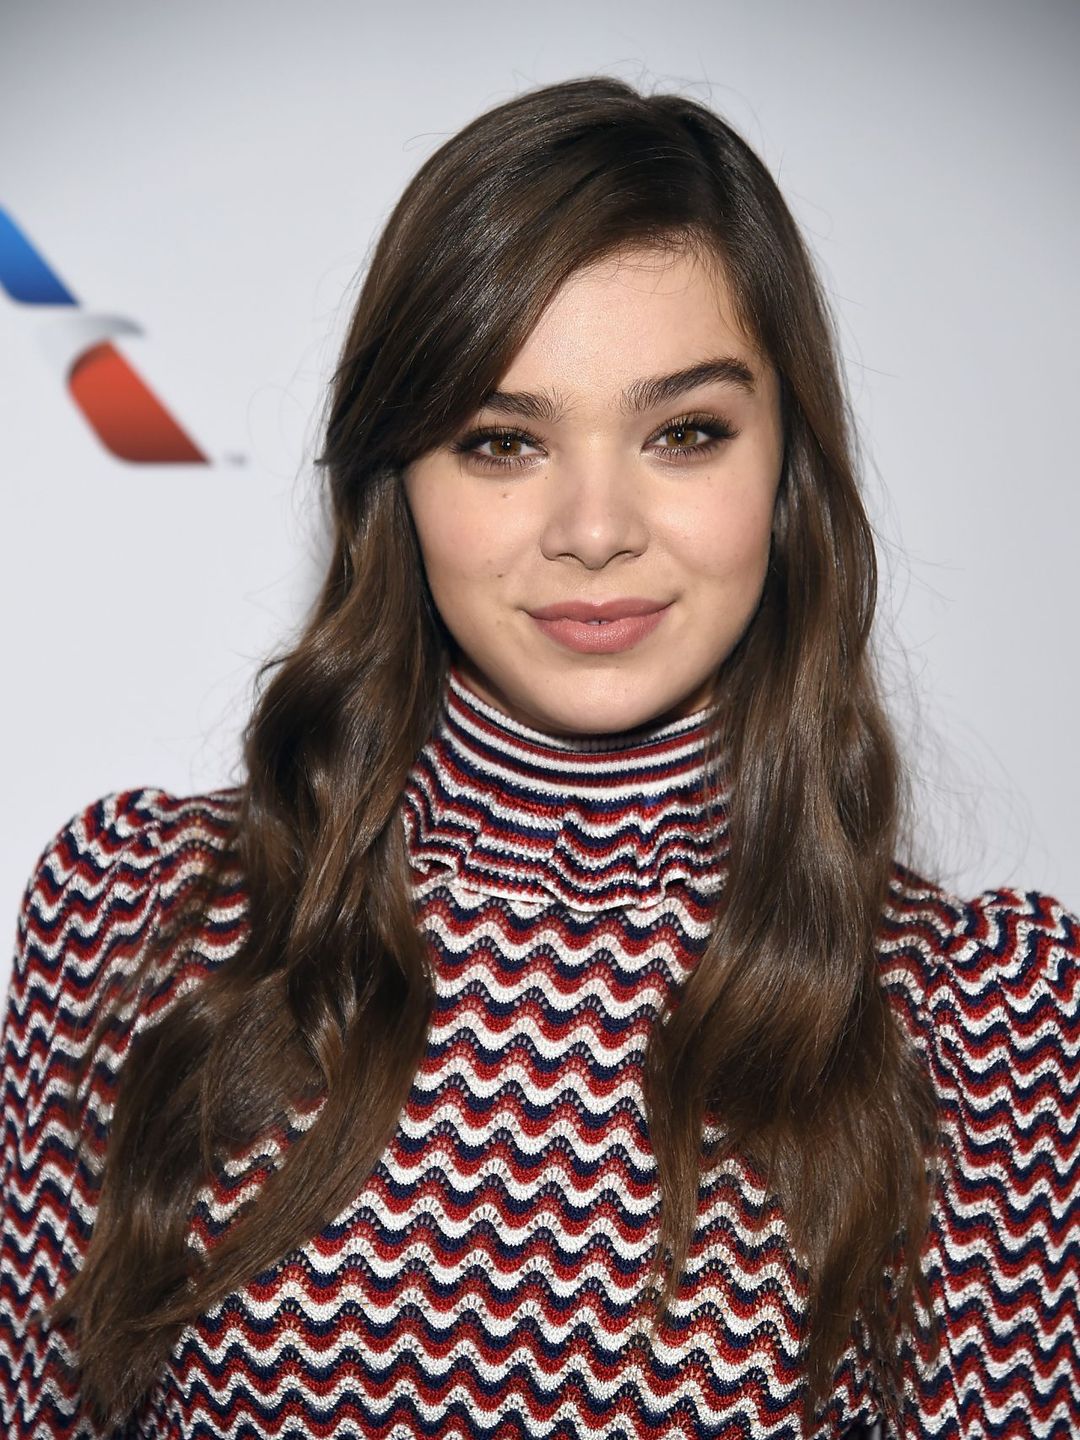 Hailee Steinfeld who is her mother